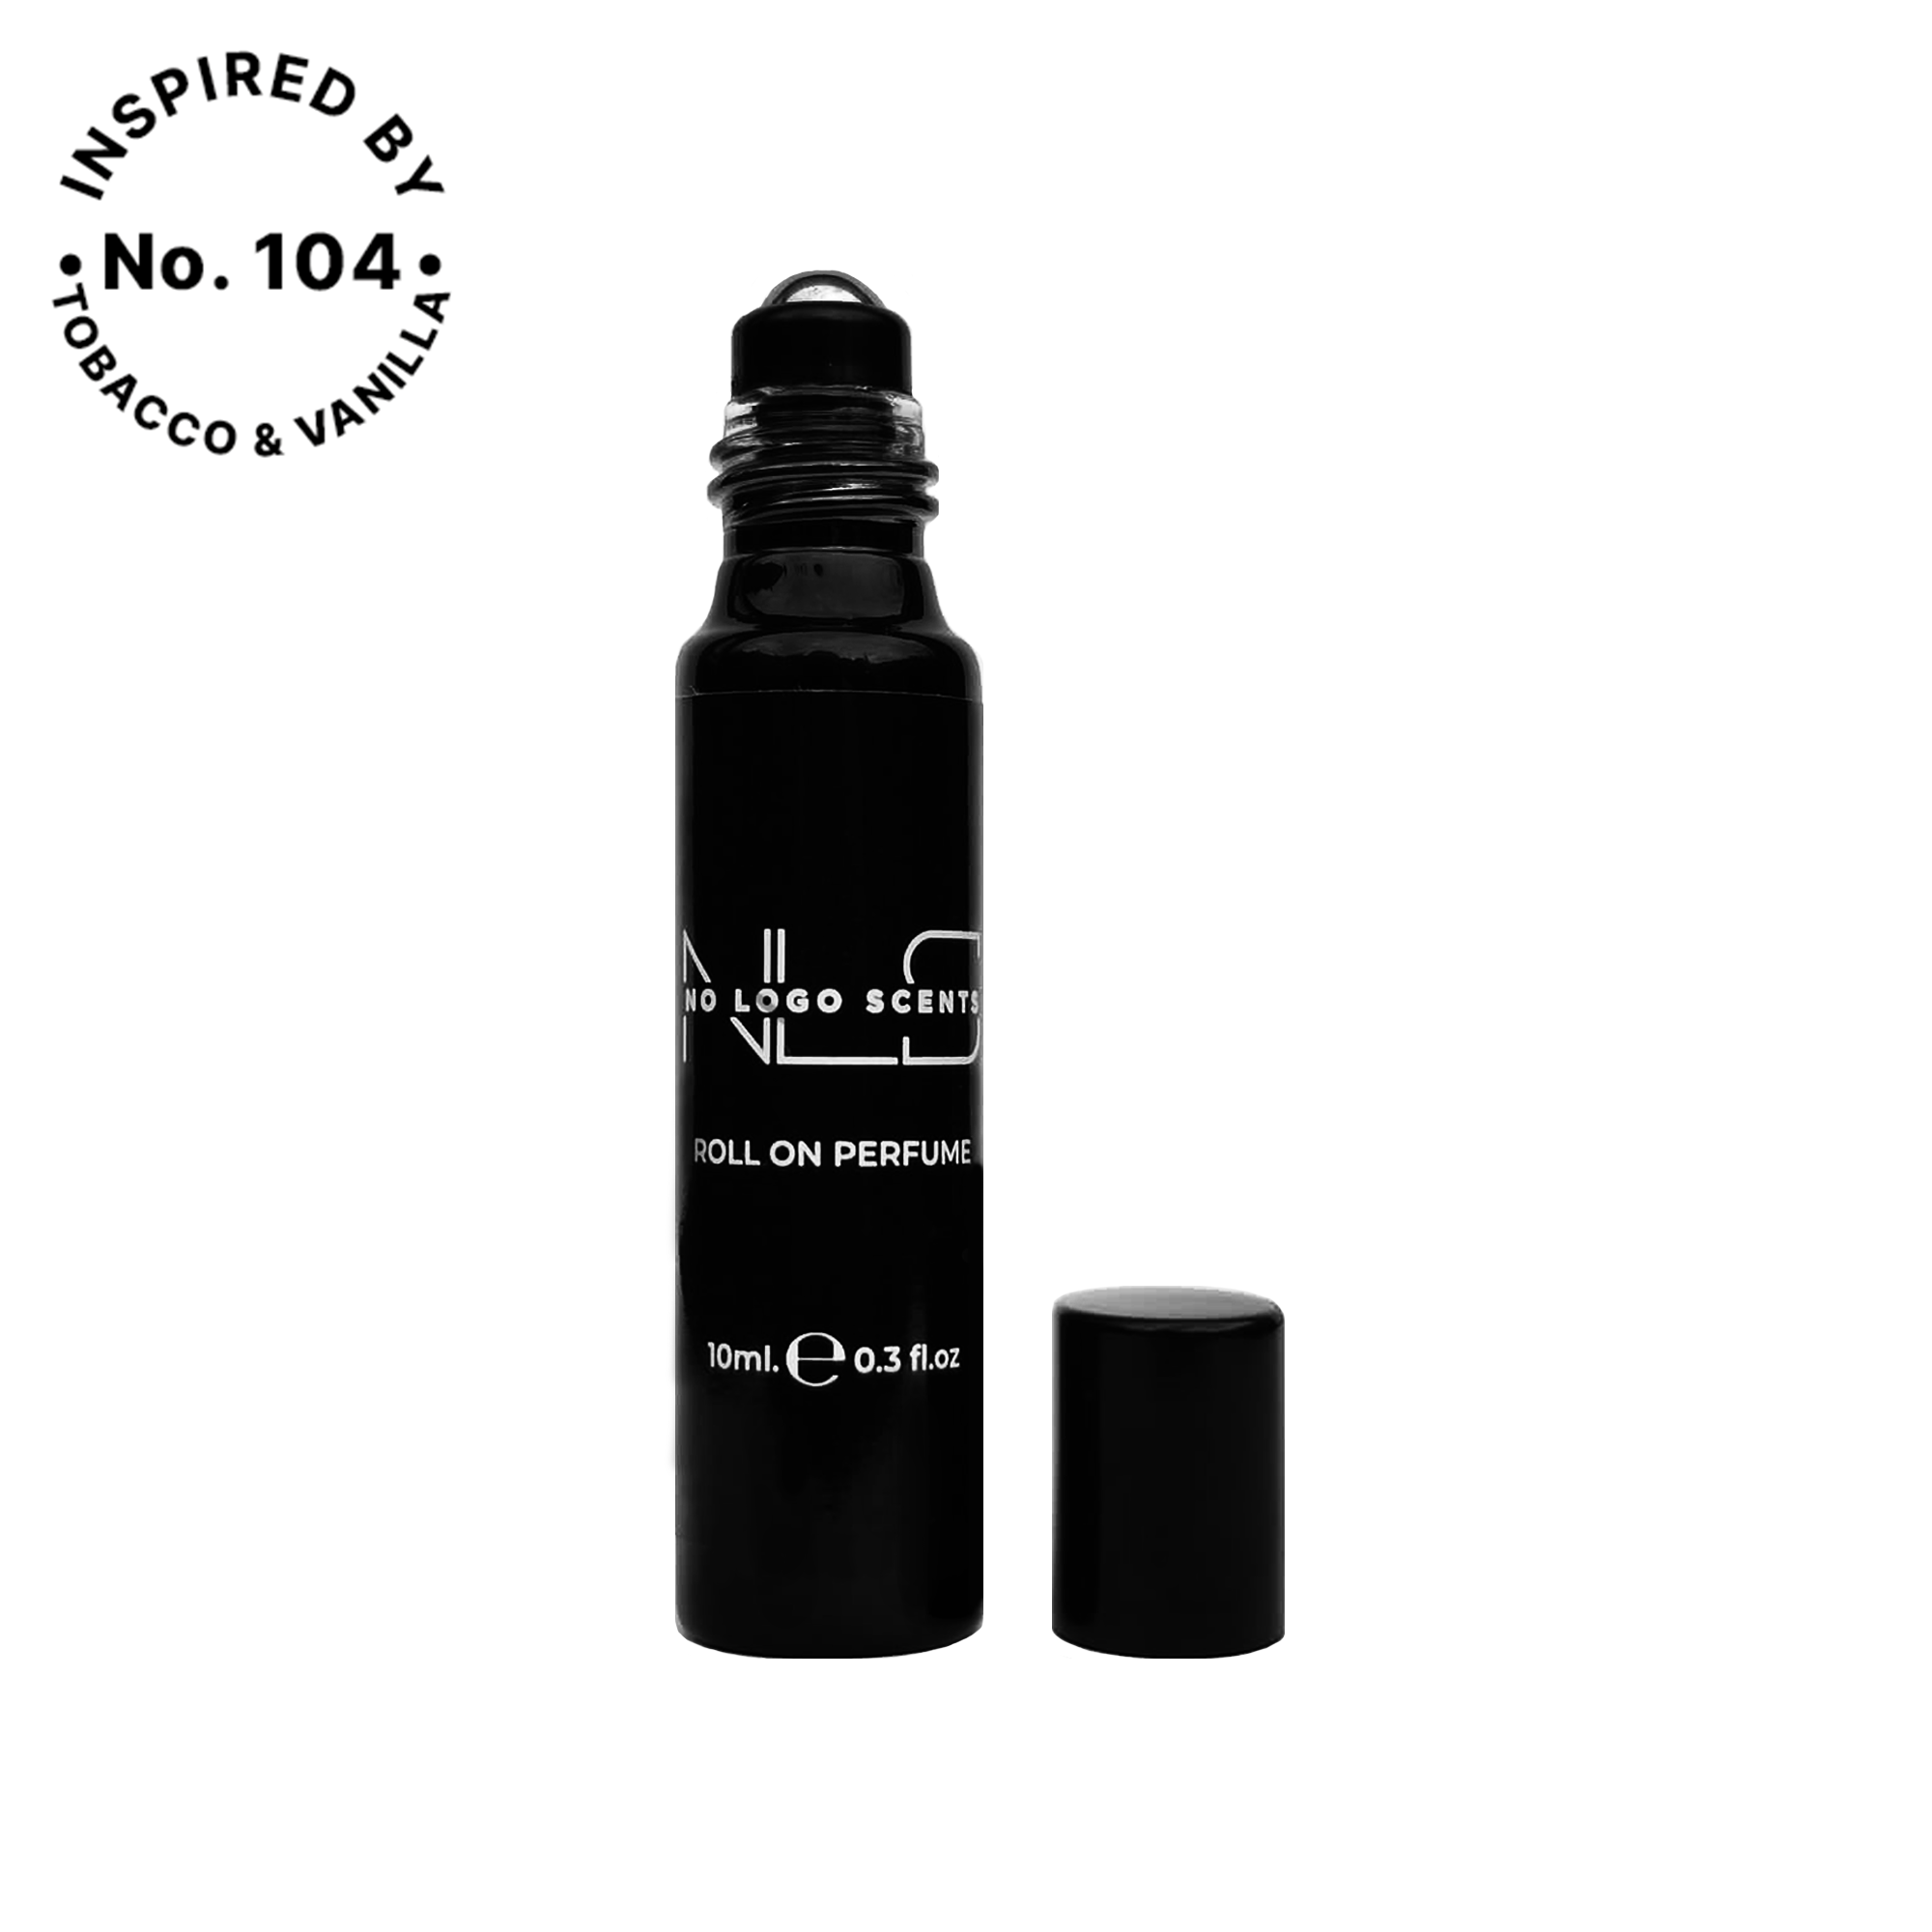 No.104 INSPIRED BY TOBACCO & VANILLA from category UNISEX ROLL ON PERFUMES - 1